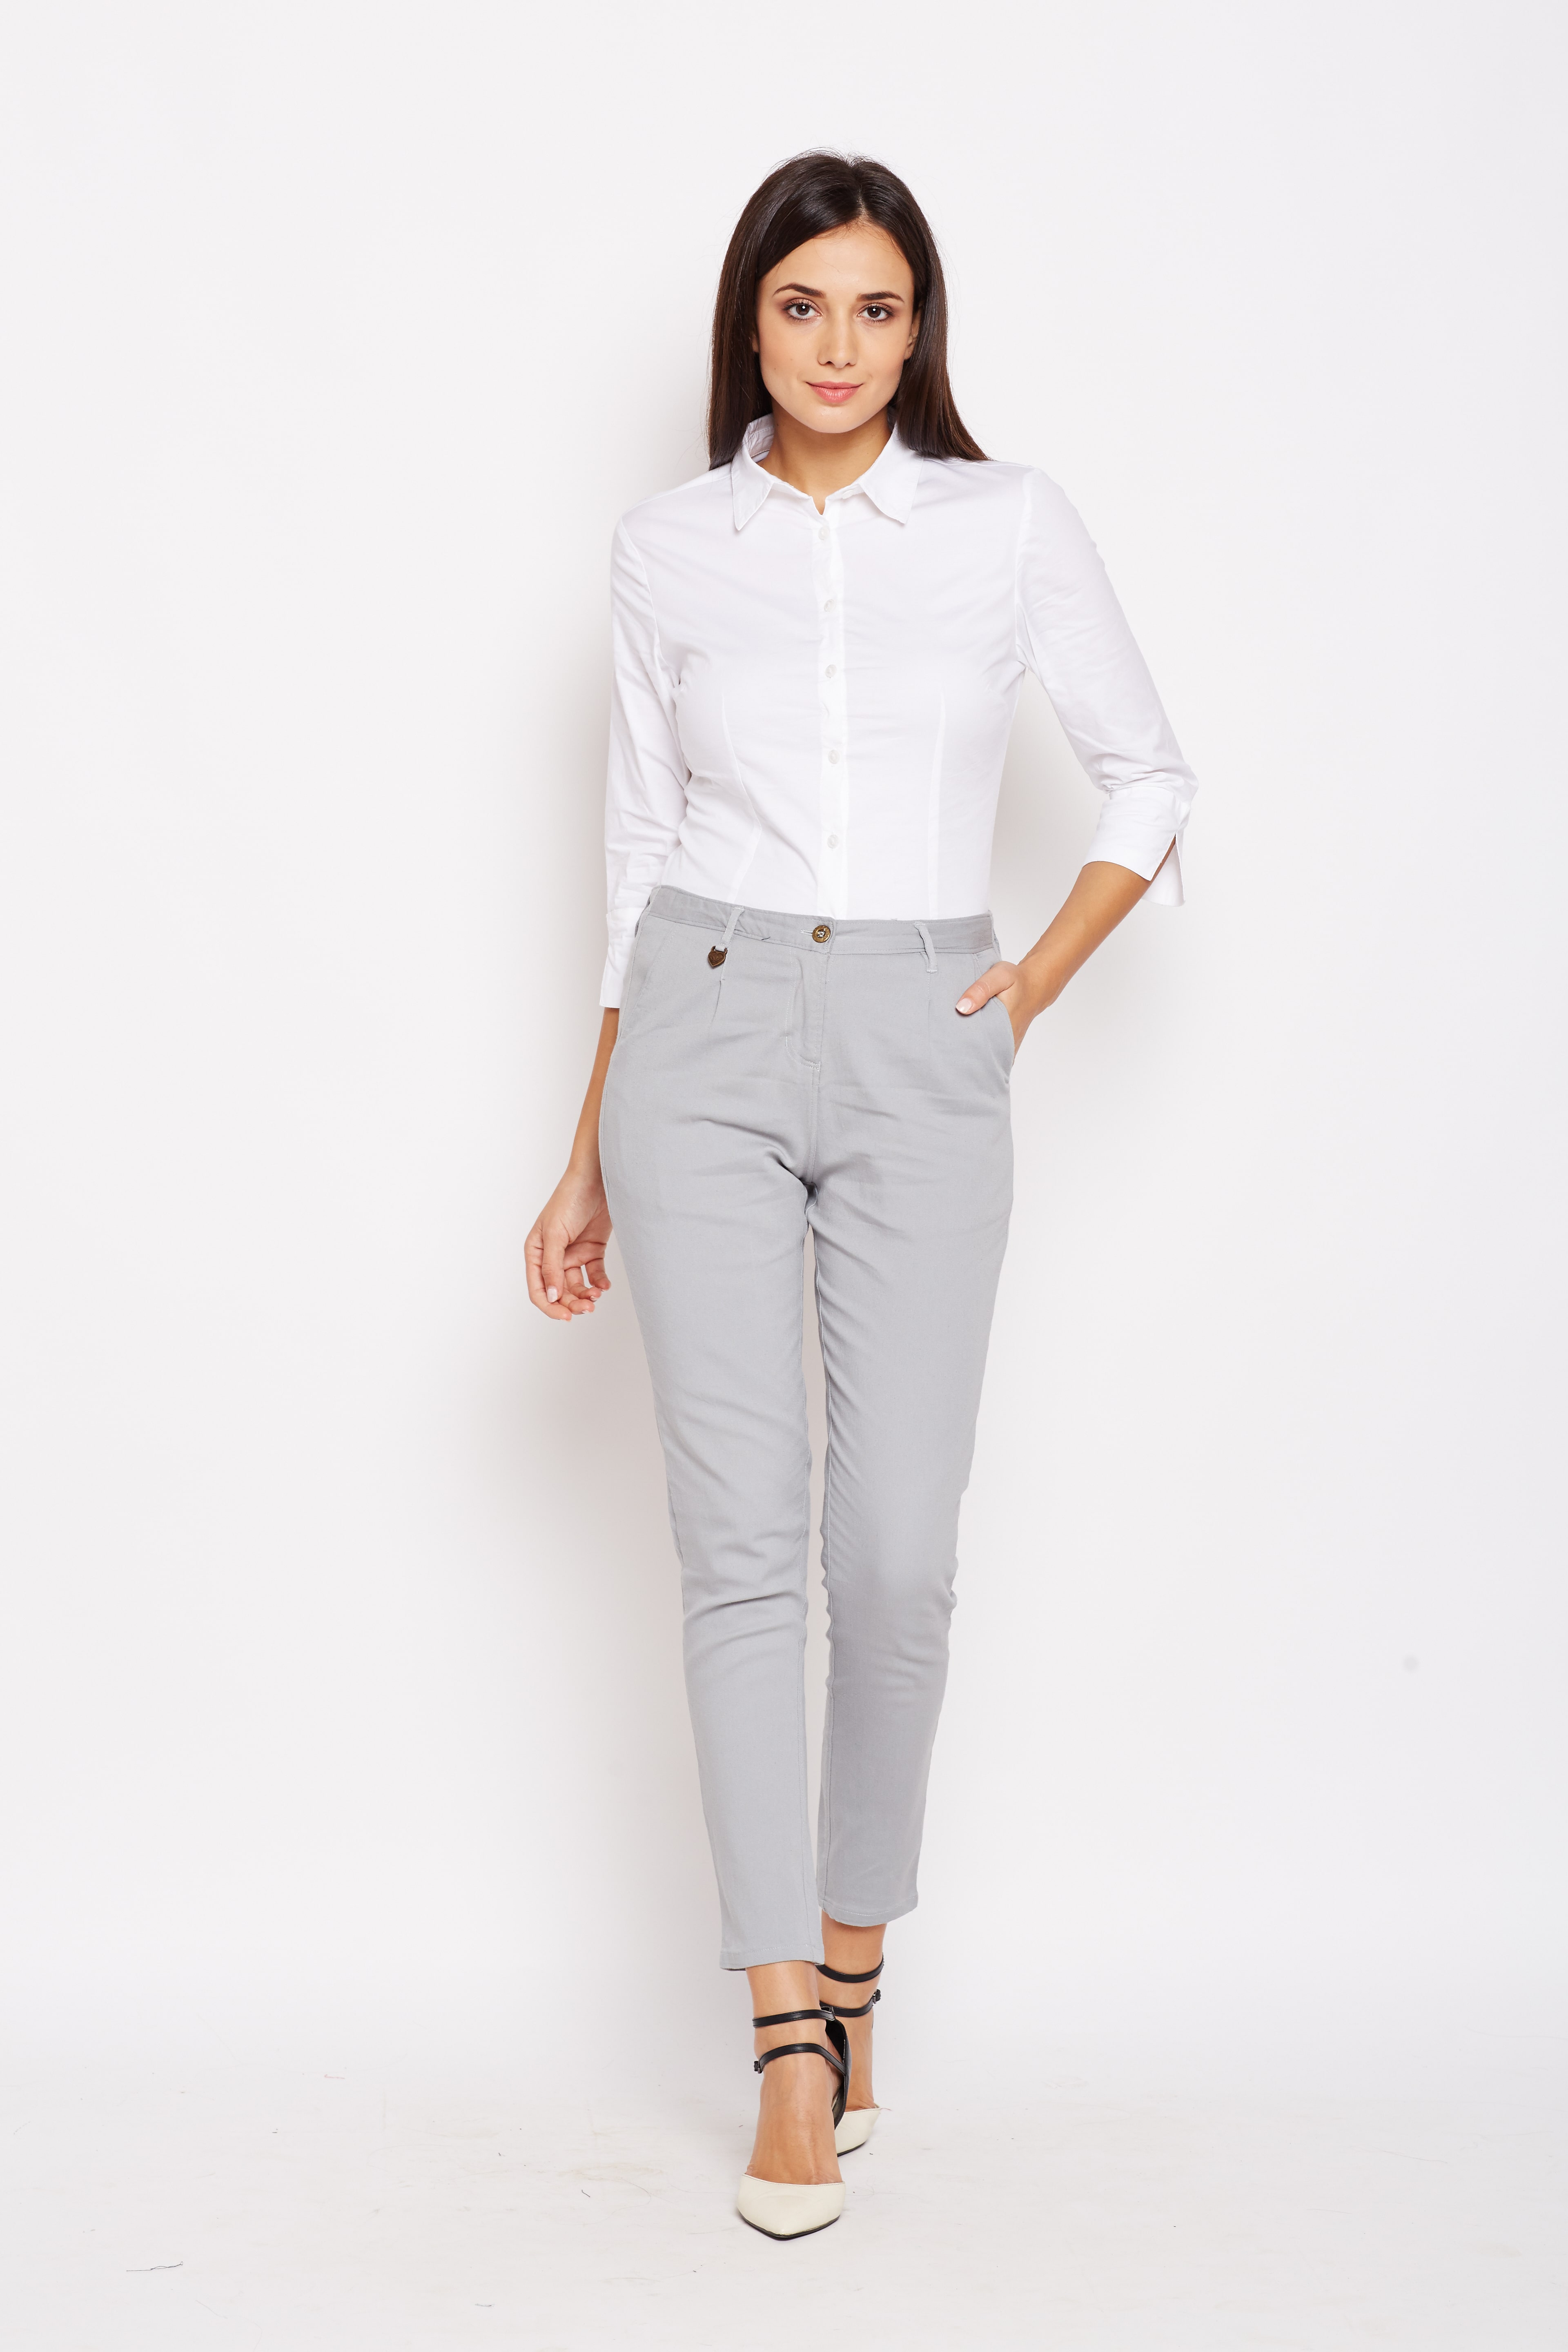 Tips For Choosing Women's formal Shirts To Wear to the office